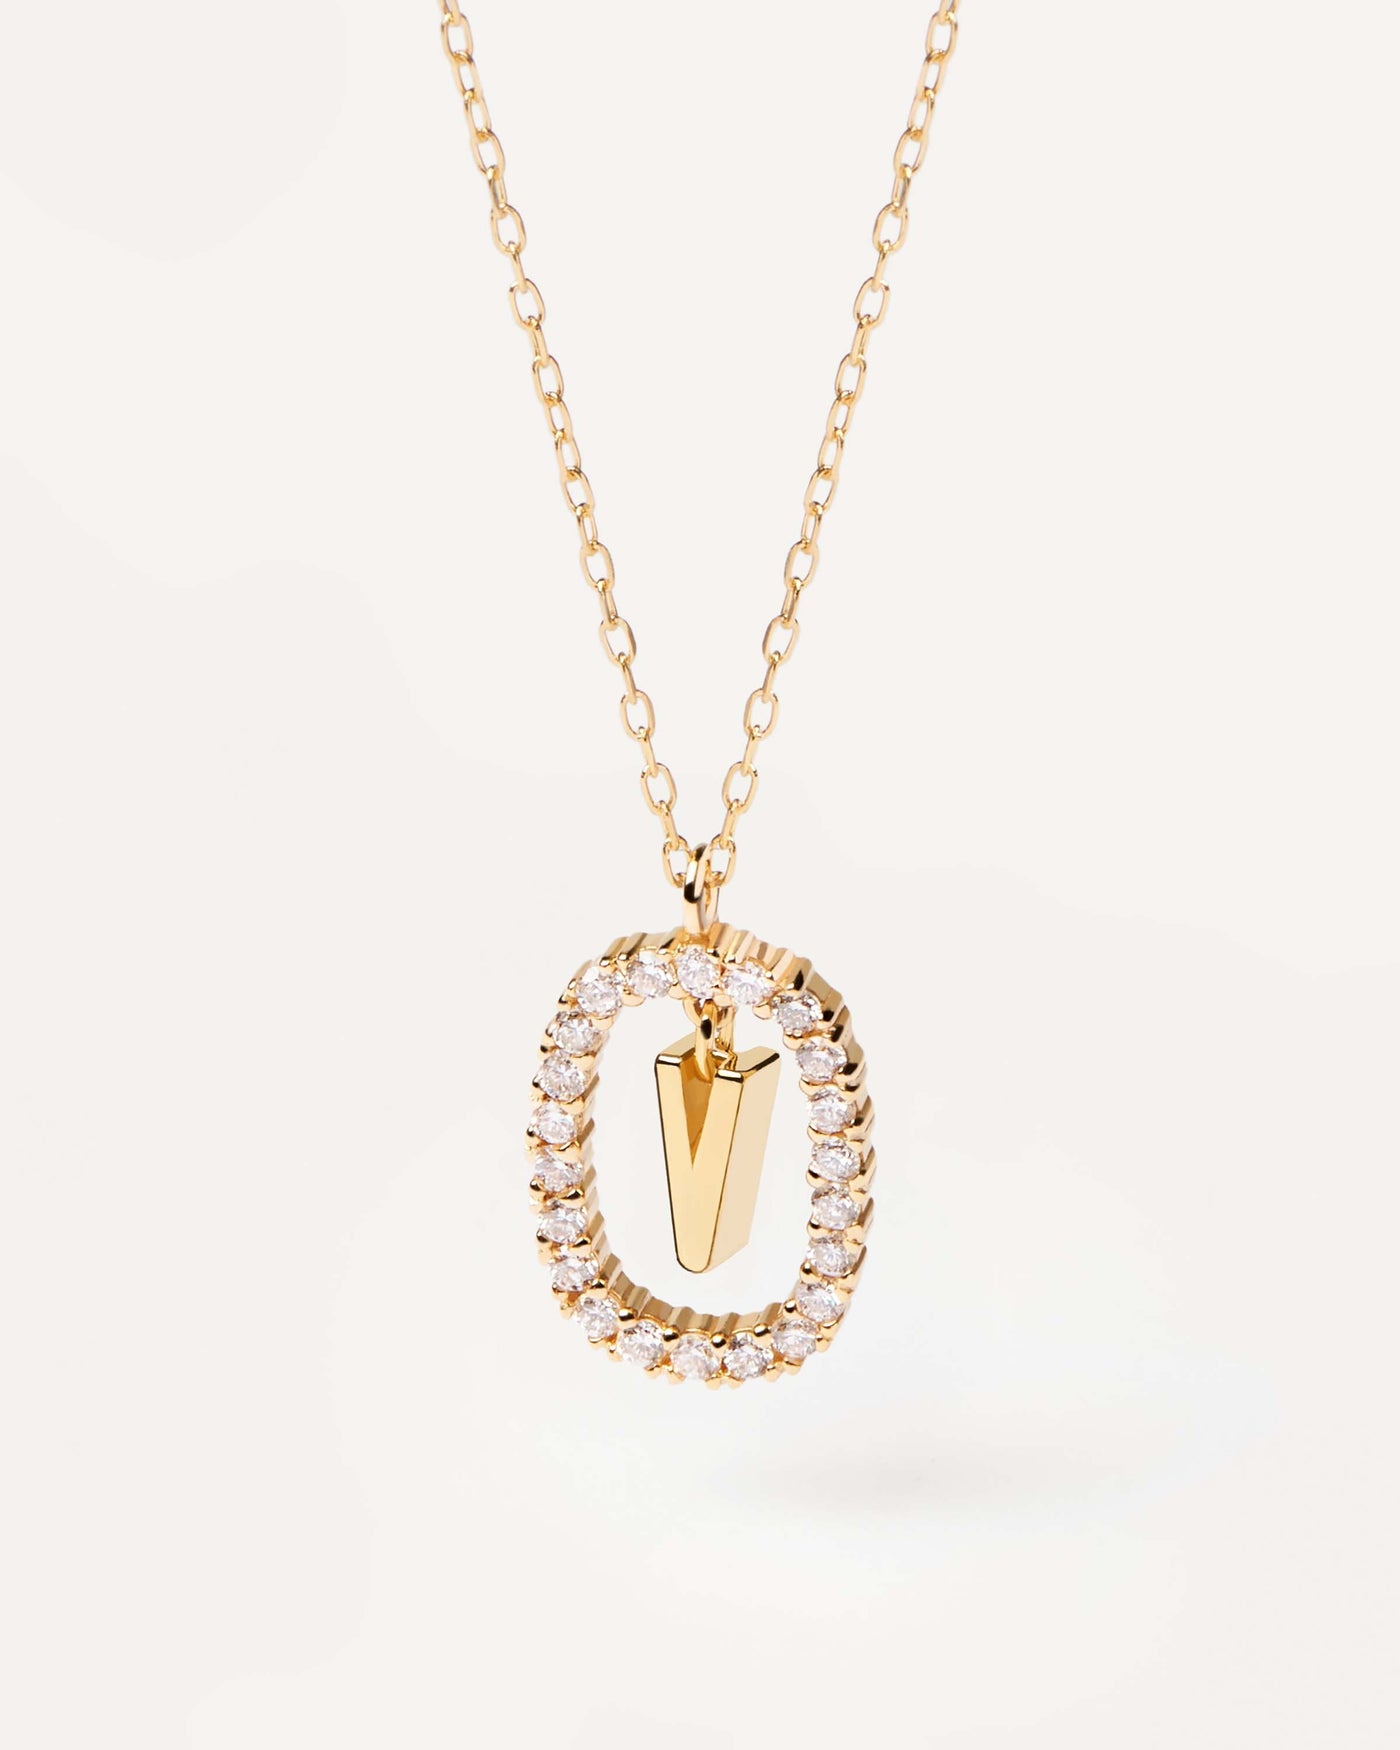 2023 Selection | Diamonds and Gold Letter V Necklace. Initial V necklace in solid yellow gold, circled by 0.33 carats lab-grown diamonds. Get the latest arrival from PDPAOLA. Place your order safely and get this Best Seller. Free Shipping.